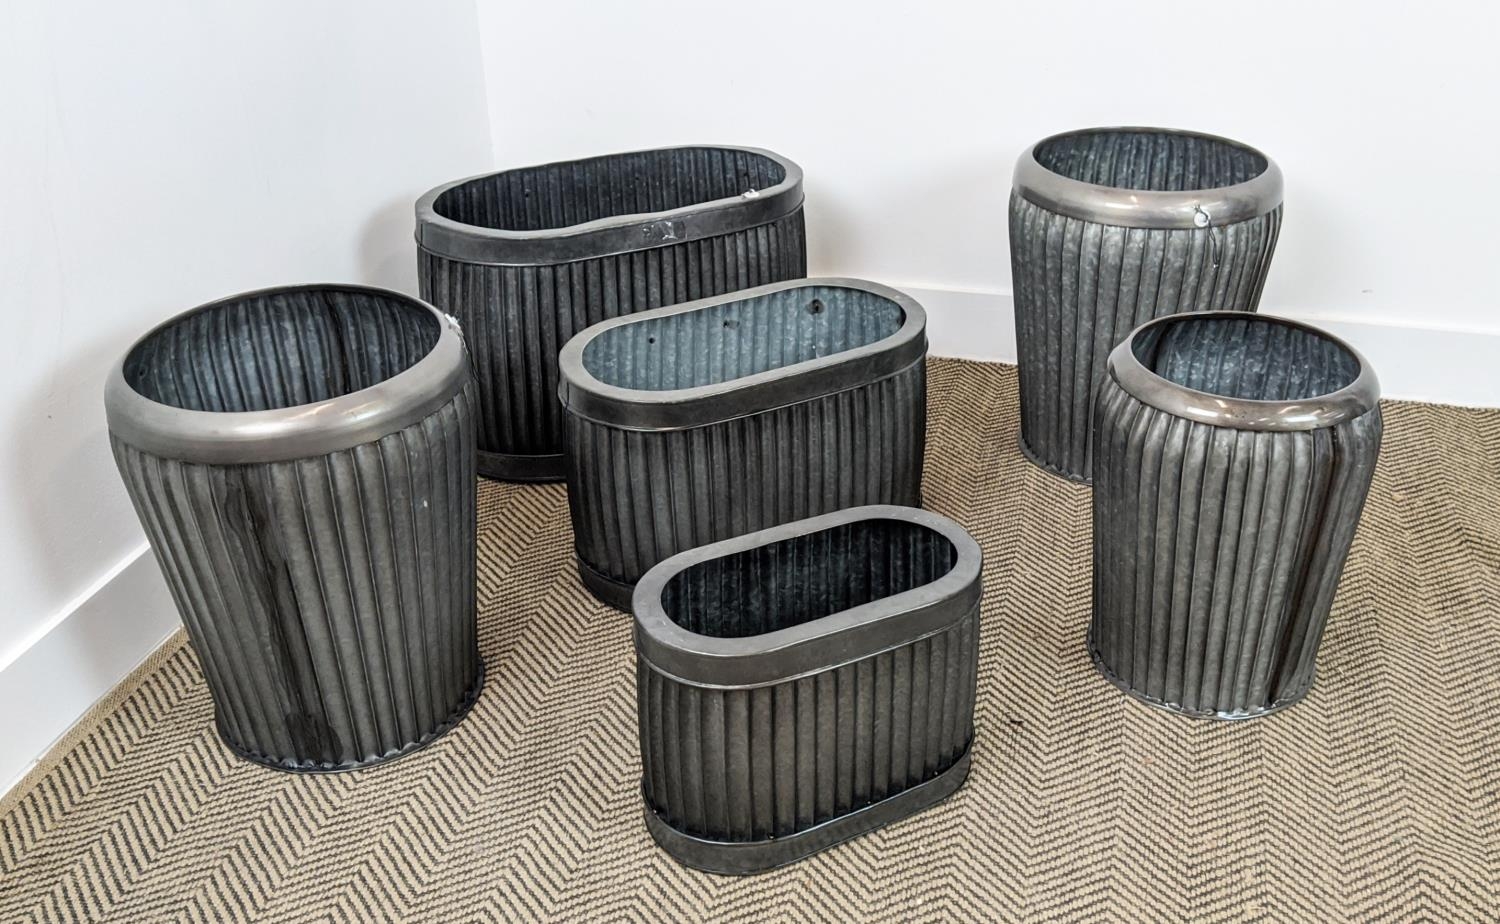 PLANTERS, two graduated sets of three, metal, 57cm x 34cm x 36cm at largest. (6) - Image 6 of 6